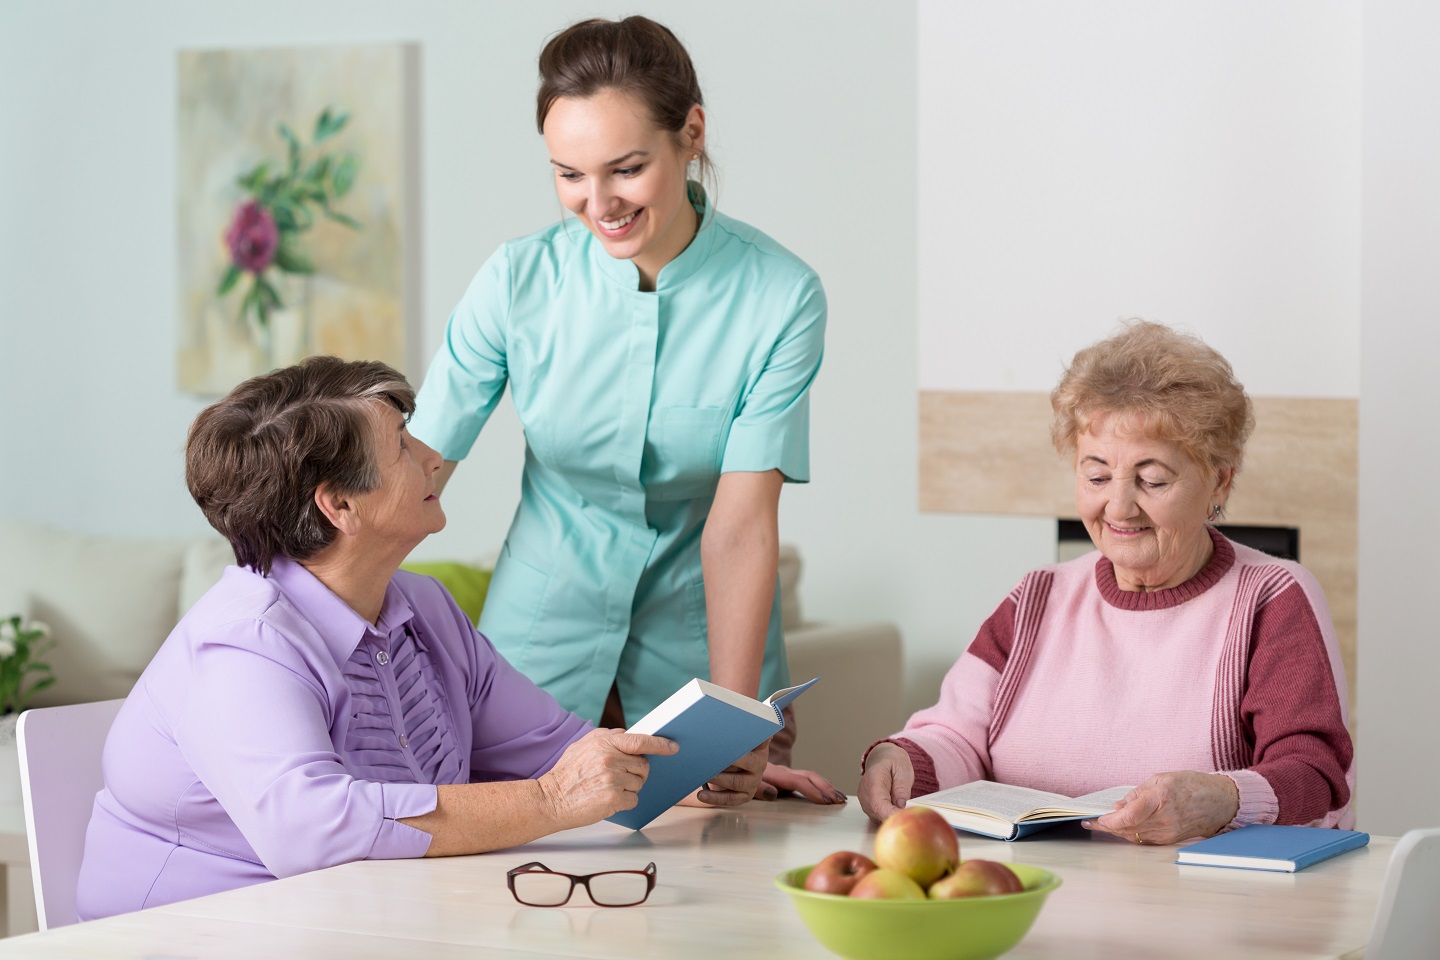 A Caring Hand Home Health Care